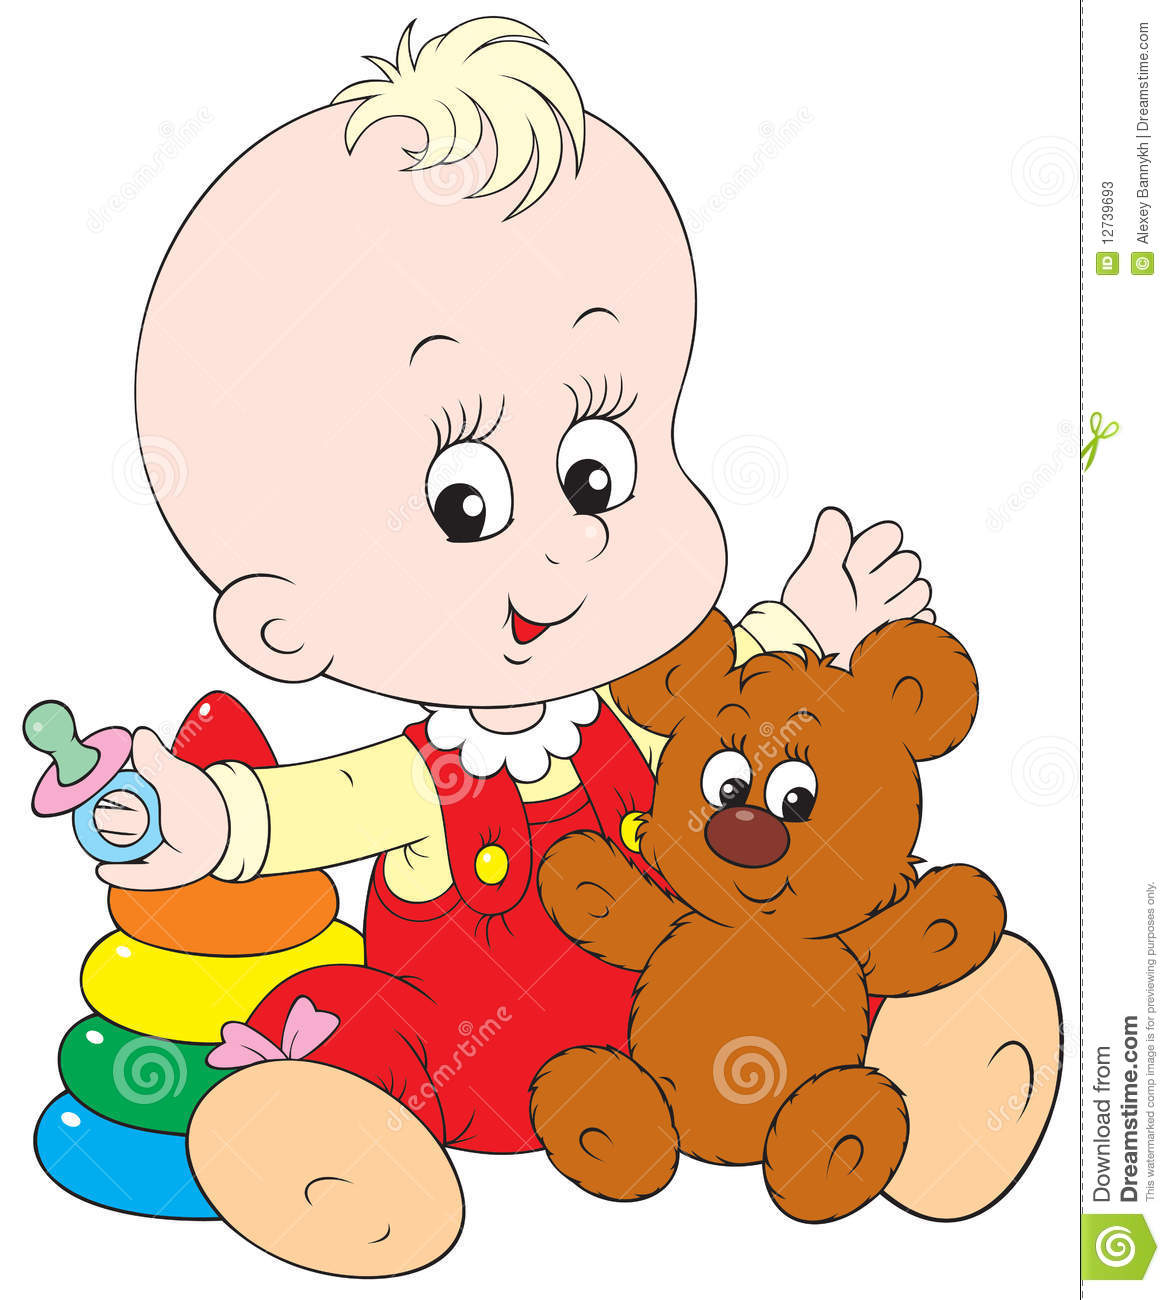 baby playing Babies playing clipart jpg